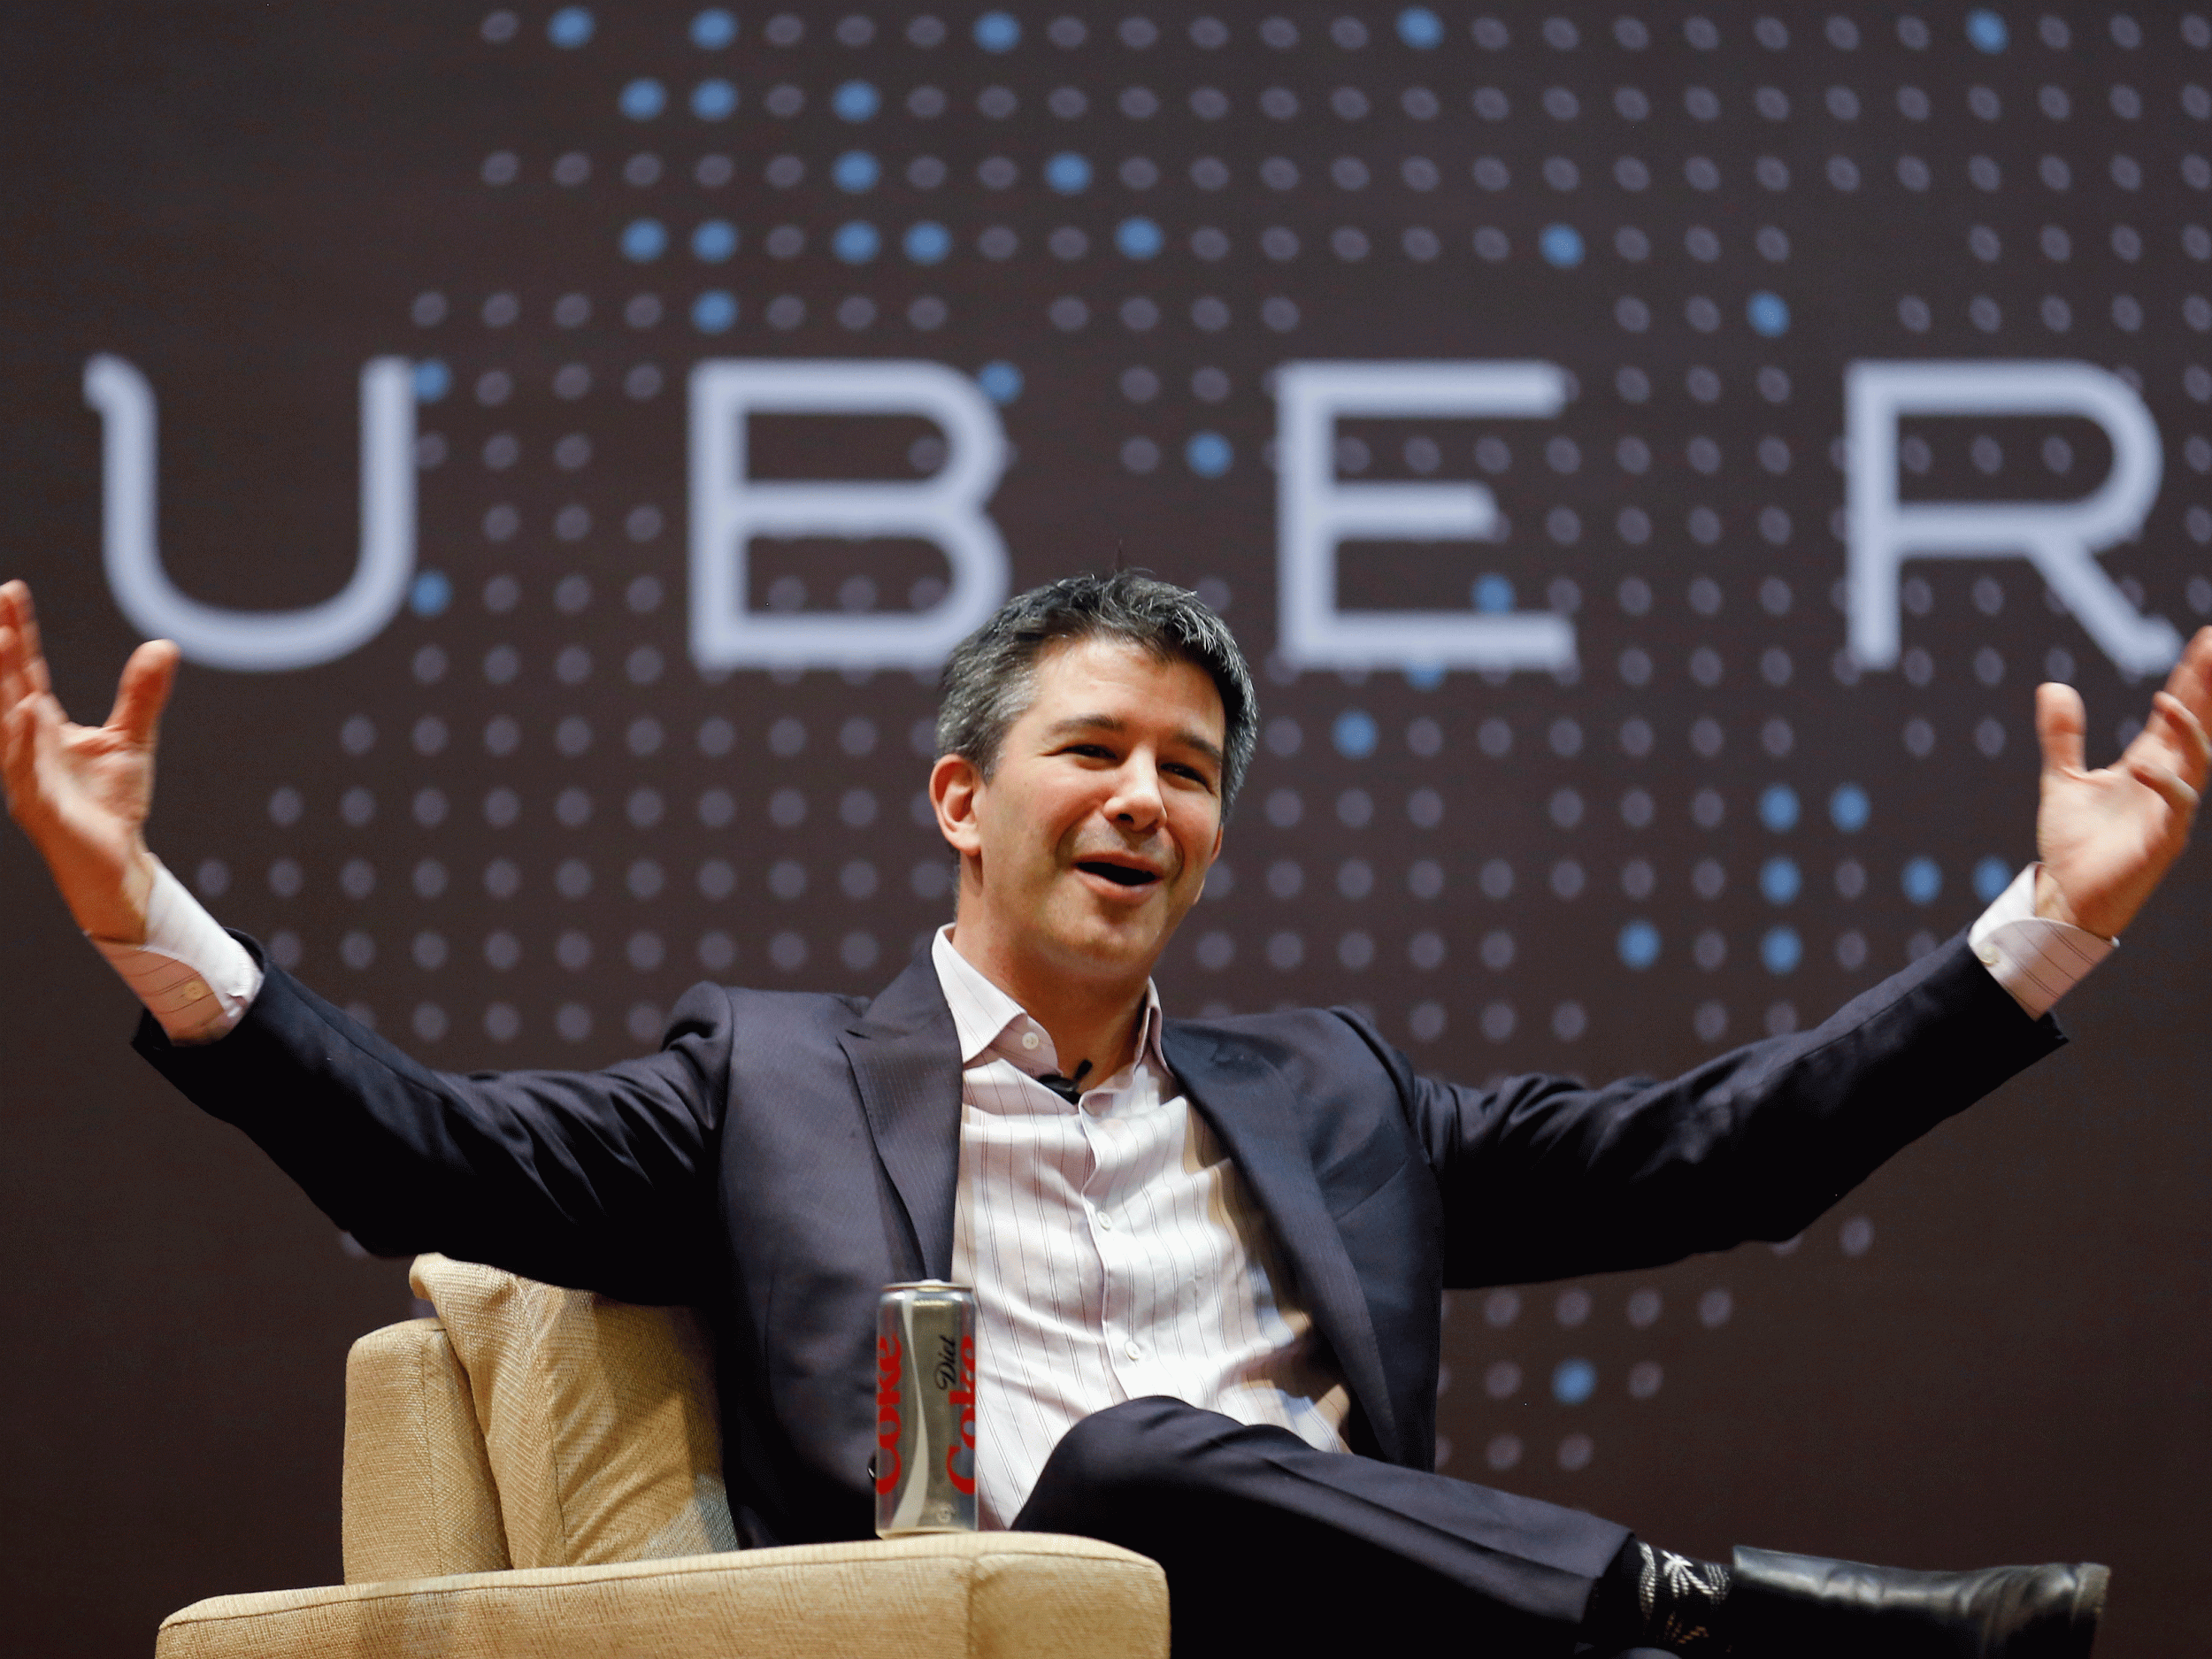 Pick-up artist: Uber CEO Travis Kalanick has a bumpy ride but his sights remain set on the world